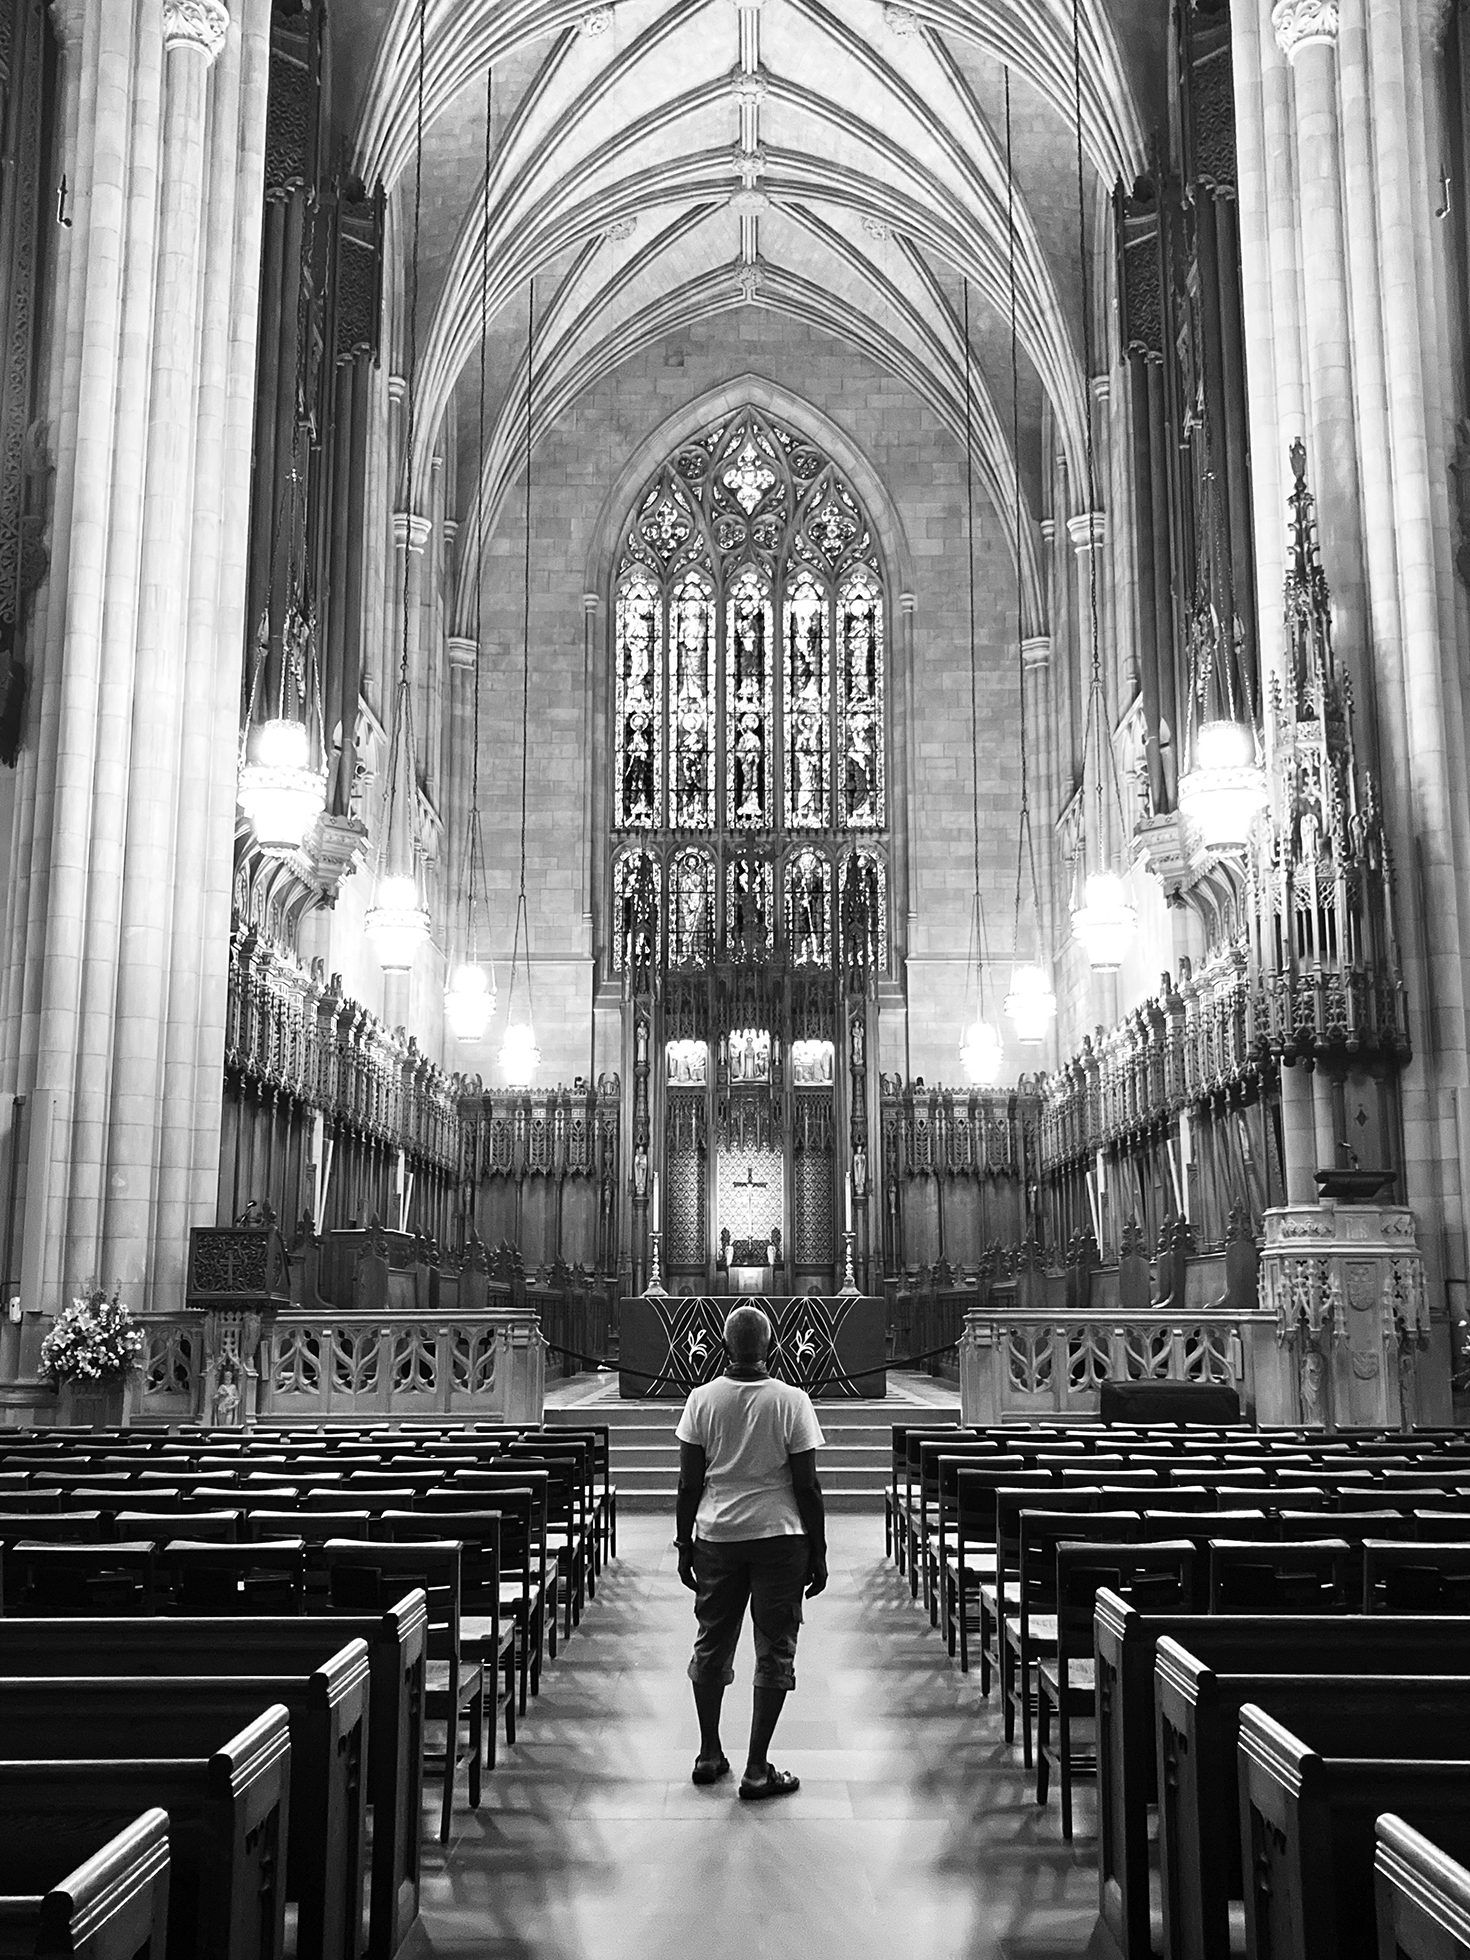 Interior of a large, impressive looking church with a high, rib-vaulted ceiling, tall columns, and a large stained-glass feature on the back wall. A casually dressed person stands in the center aisle and looks toward the back wall.